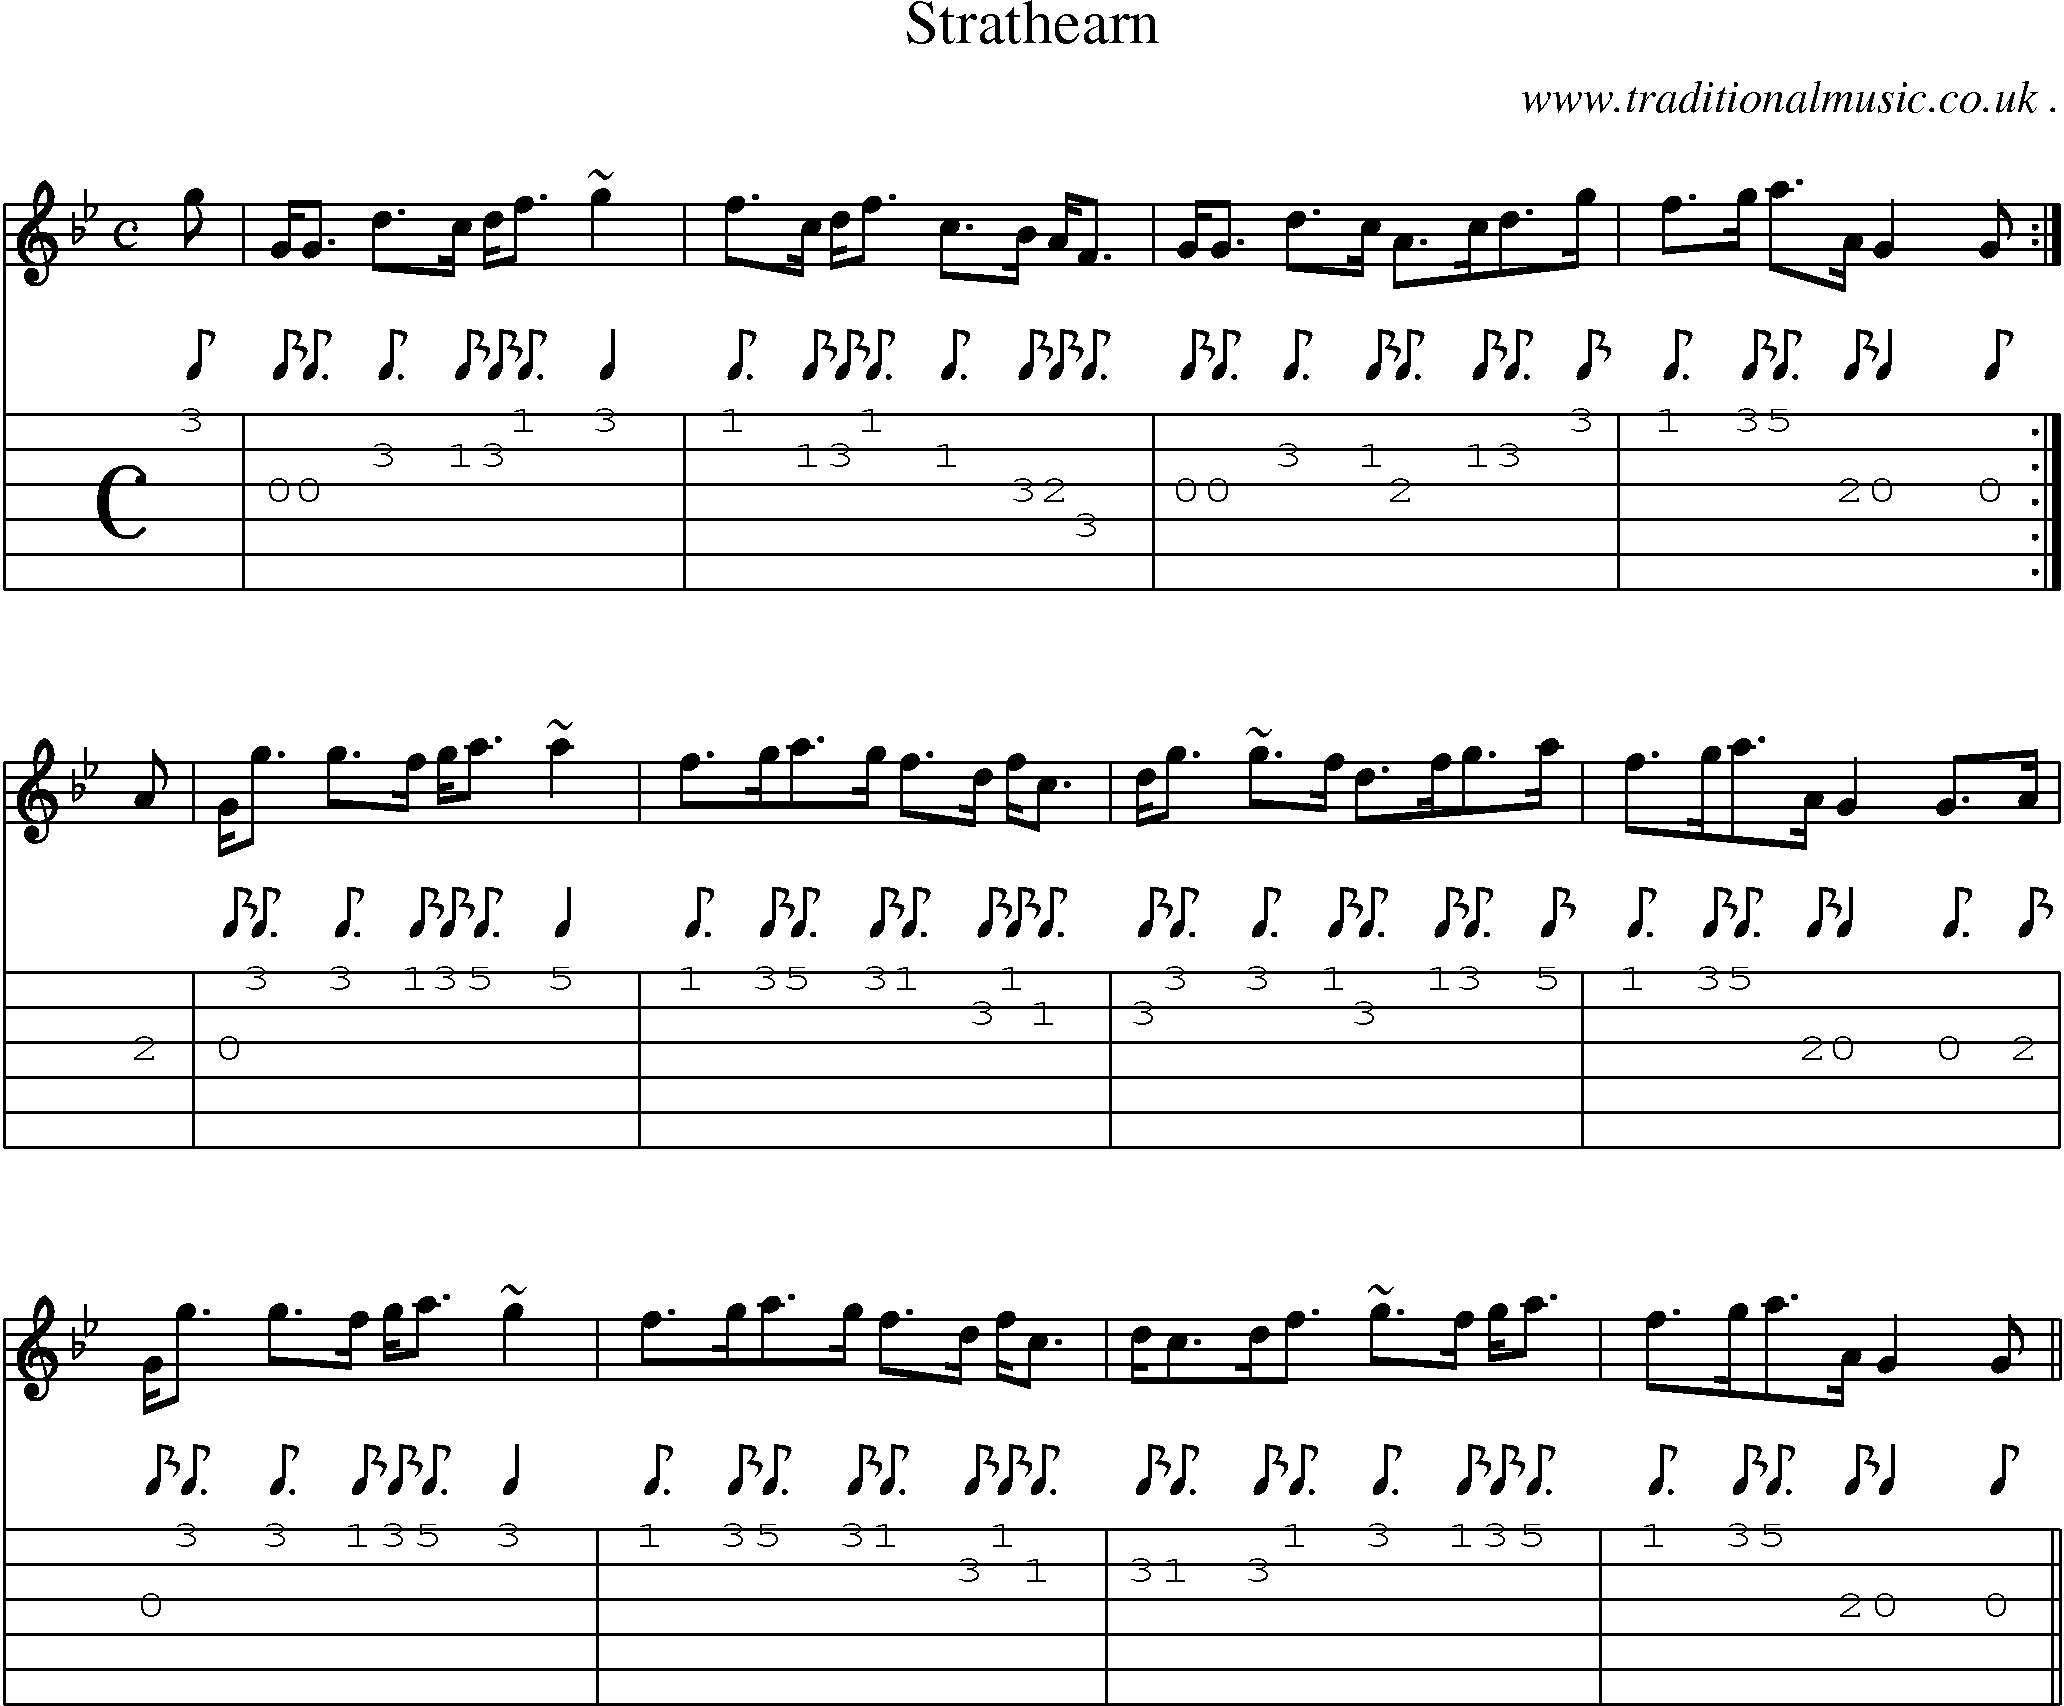 Sheet-music  score, Chords and Guitar Tabs for Strathearn